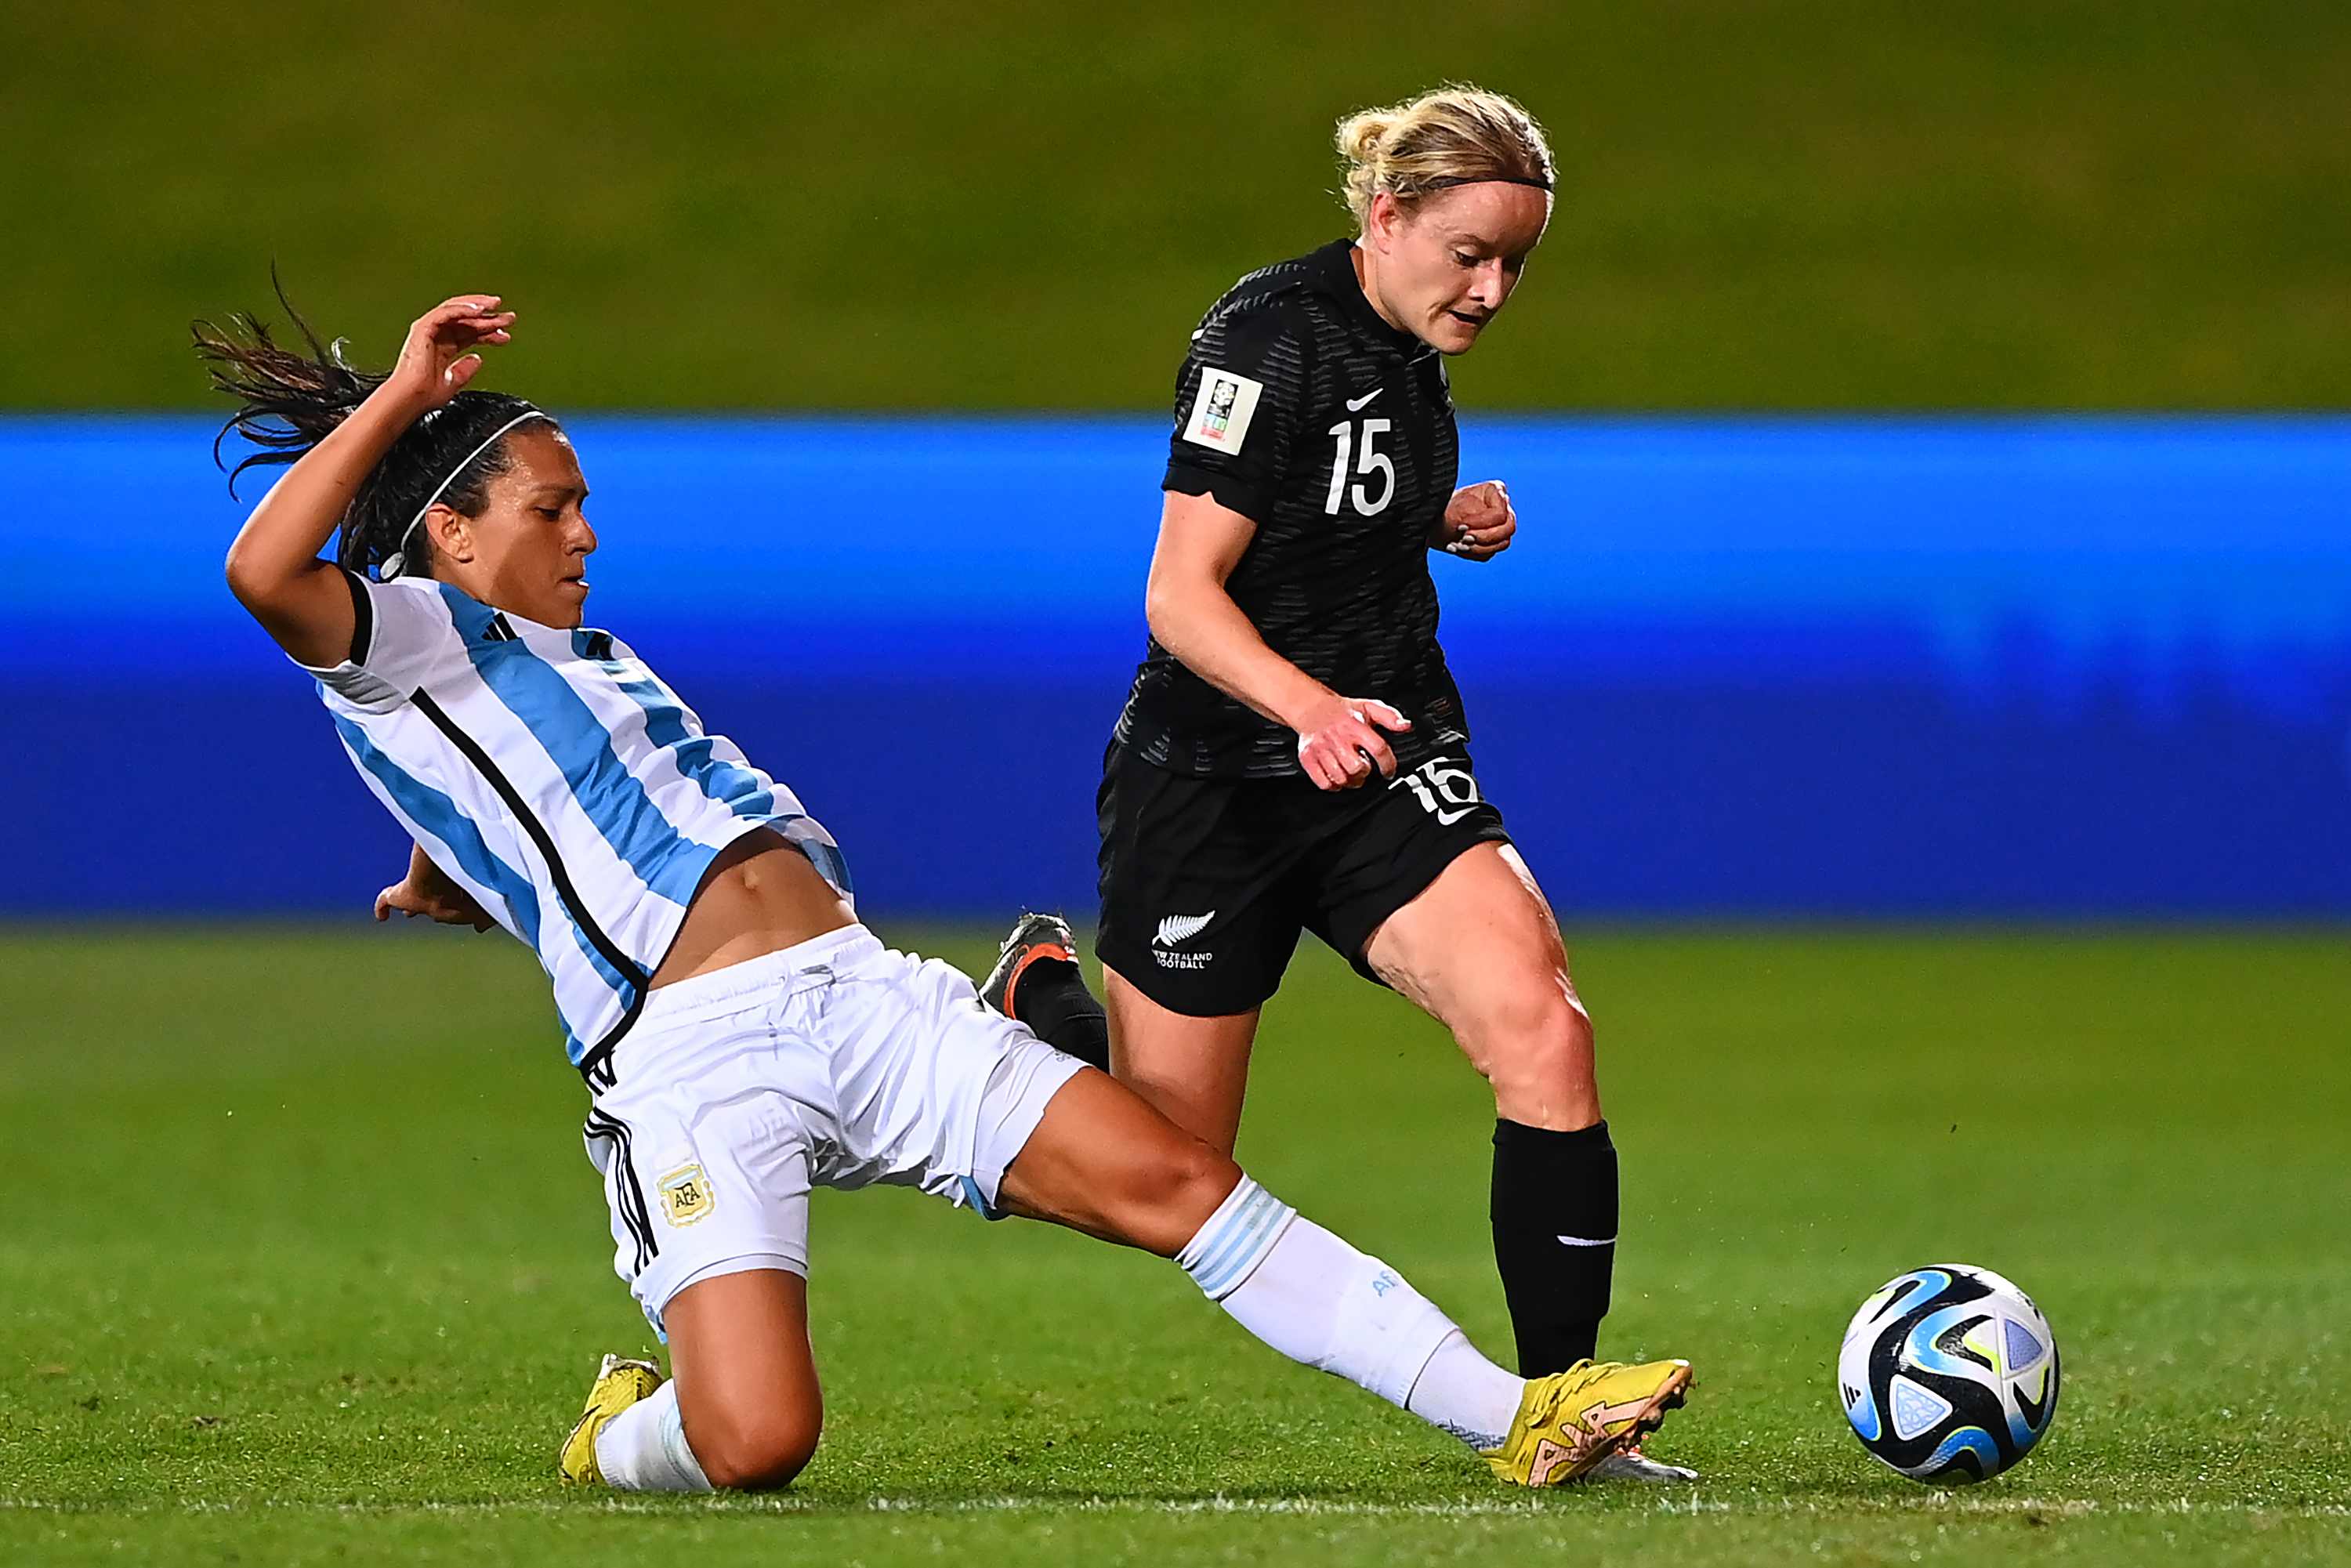 Eliana Stabile of Argentina National Women's soccer team in action